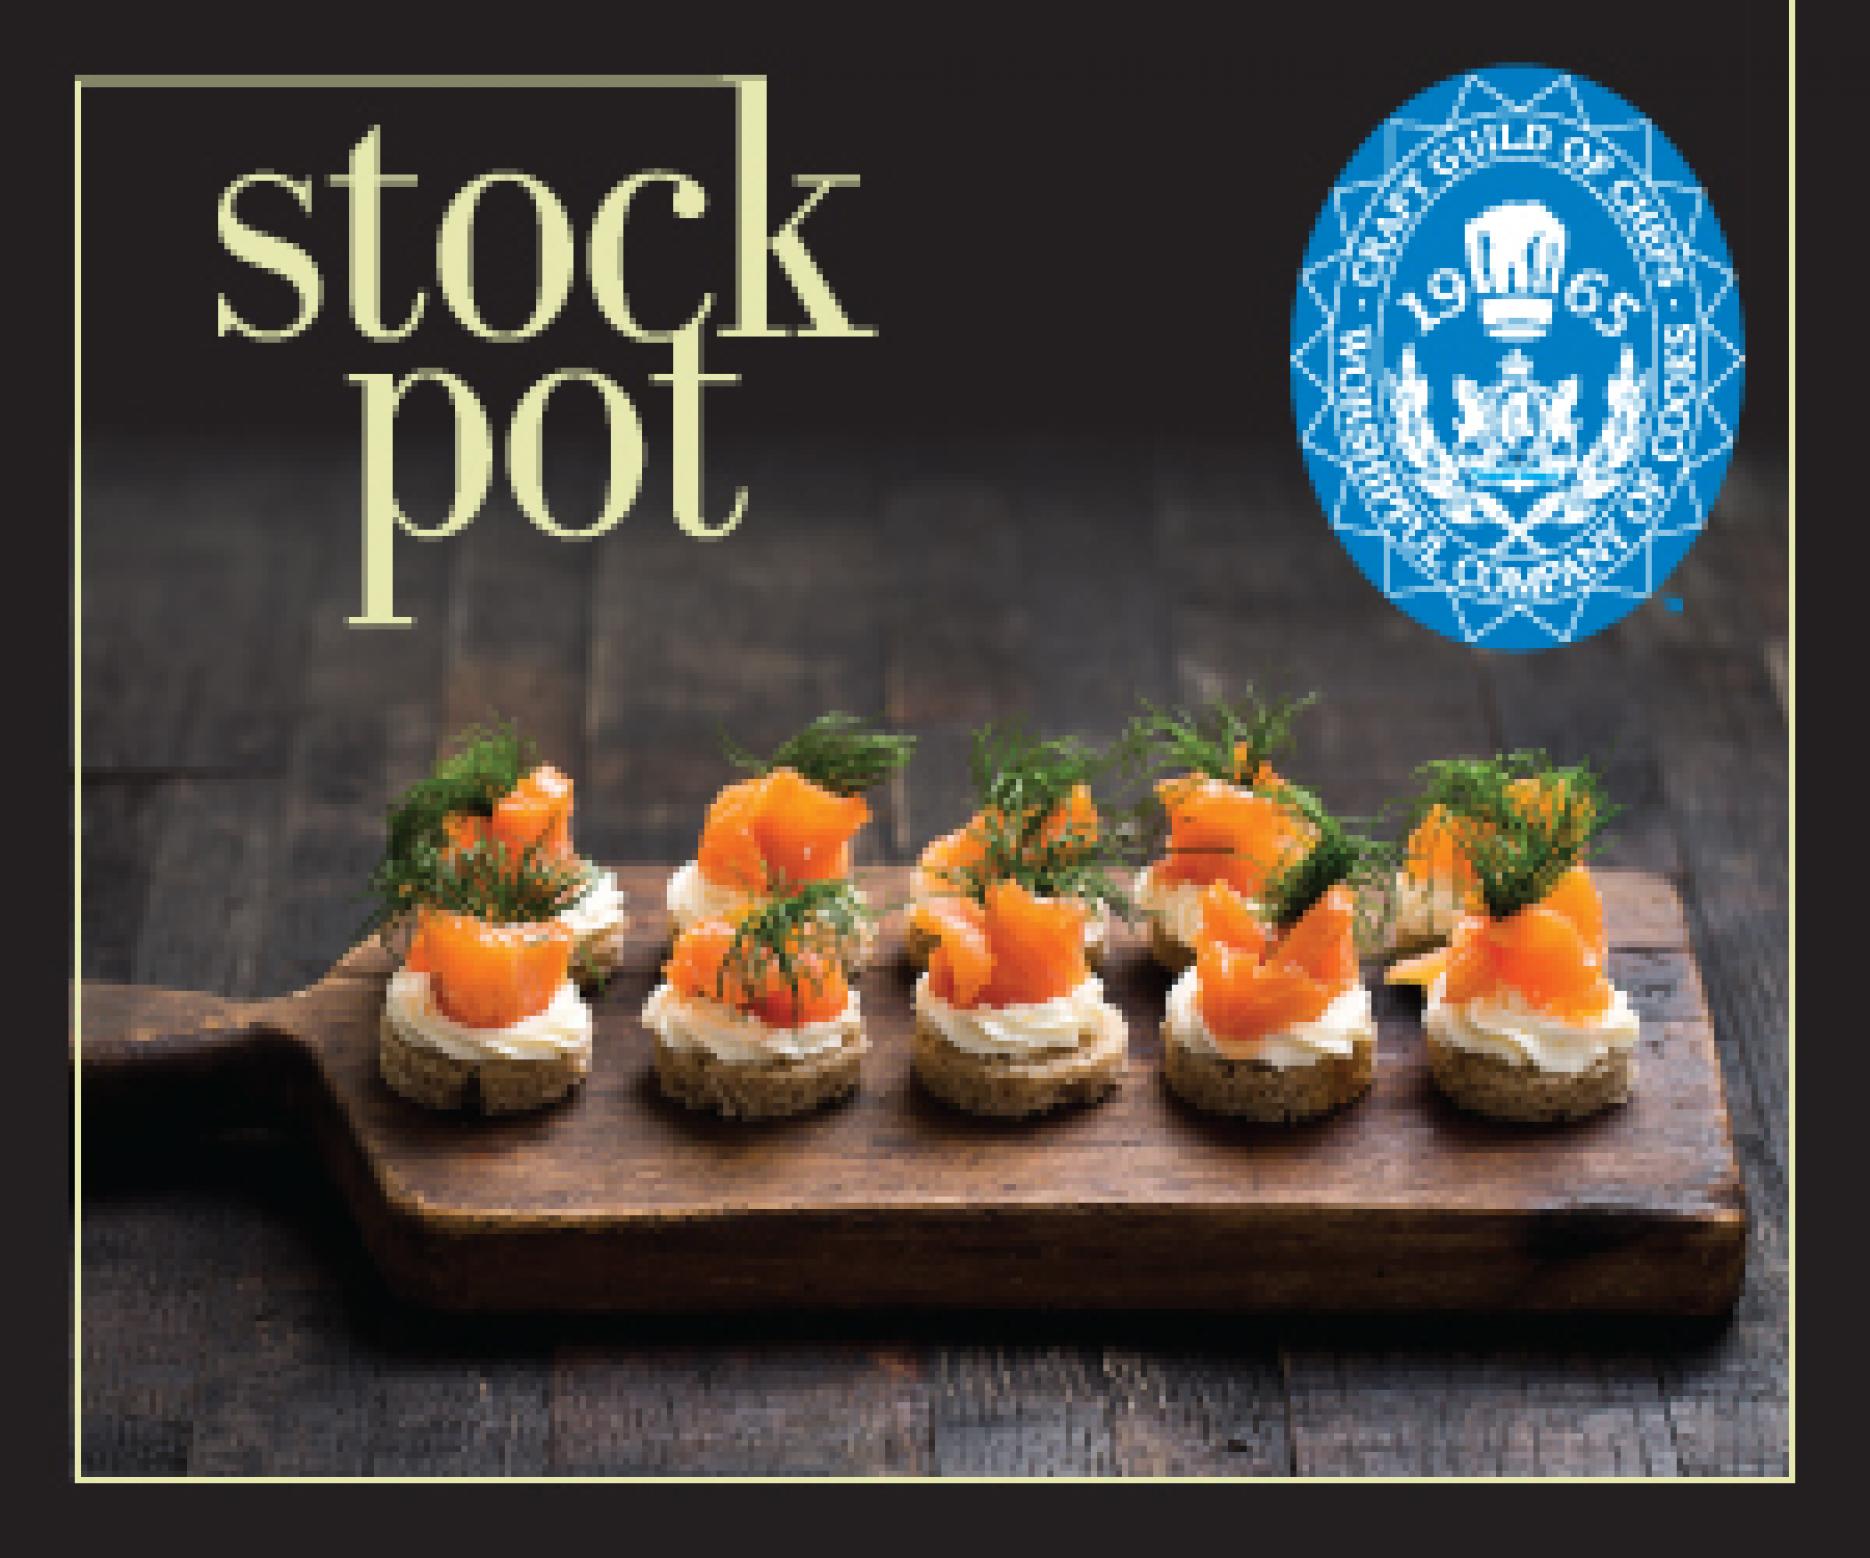 Stockpot magazine relaunches for 2015